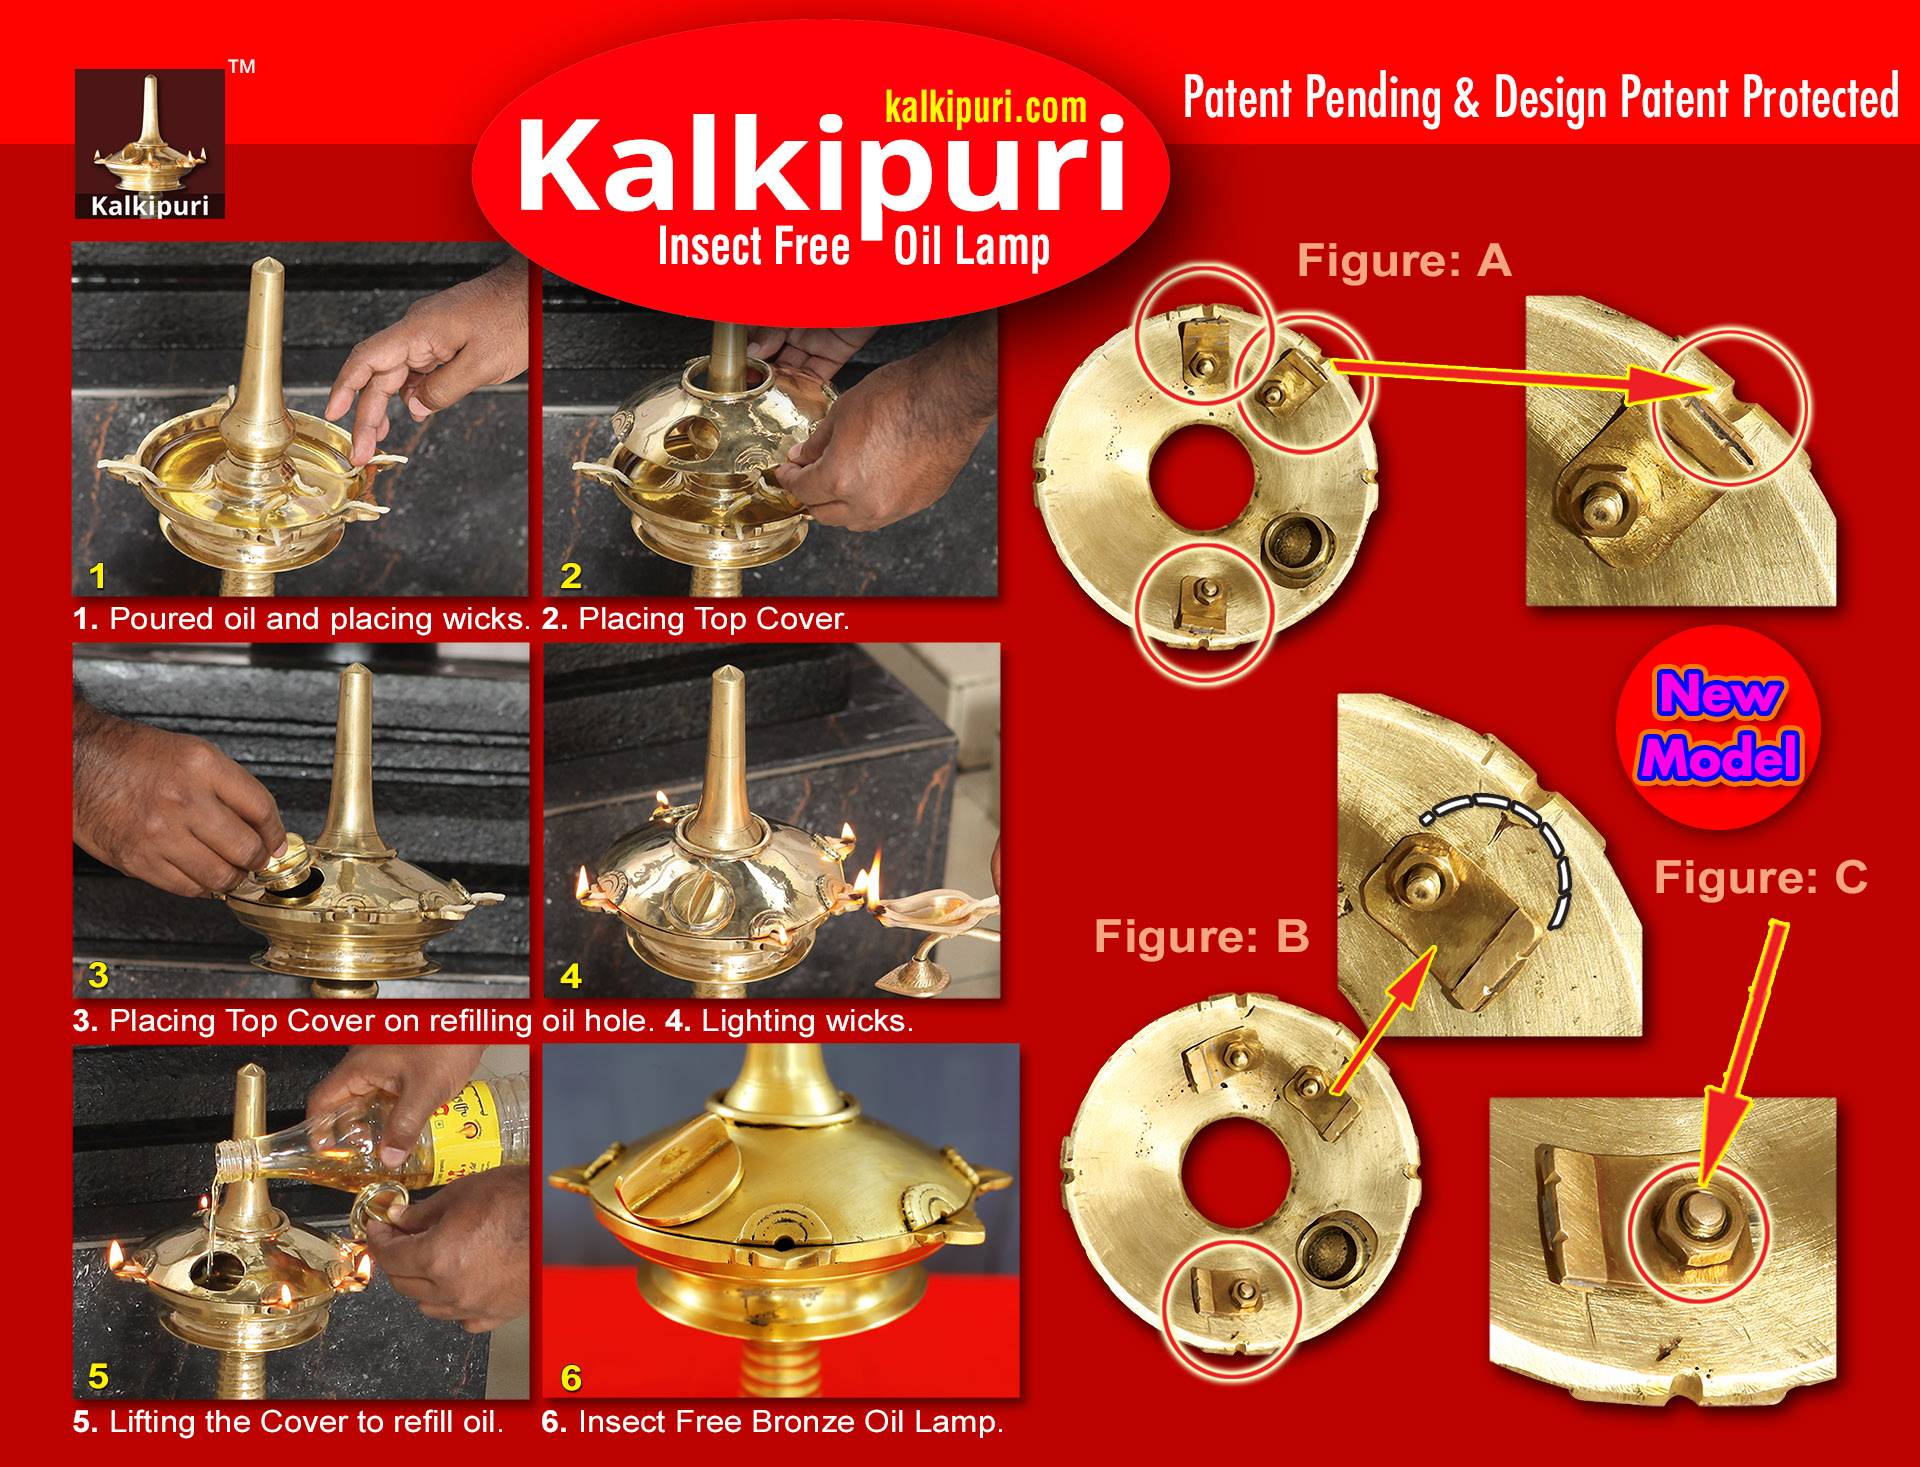 Kalkipuri Insect Free Bronze Oil Lamp. Bronze Lid with special arrangements for oil Lamp to make it insect free. Patent pending. Design patent No.225592. Newly modified design patent protected. Inventor: Kalki, Kalkipuri, Edavannappara, Malappuram-673645, Kerala, India. kalkipuri.com.